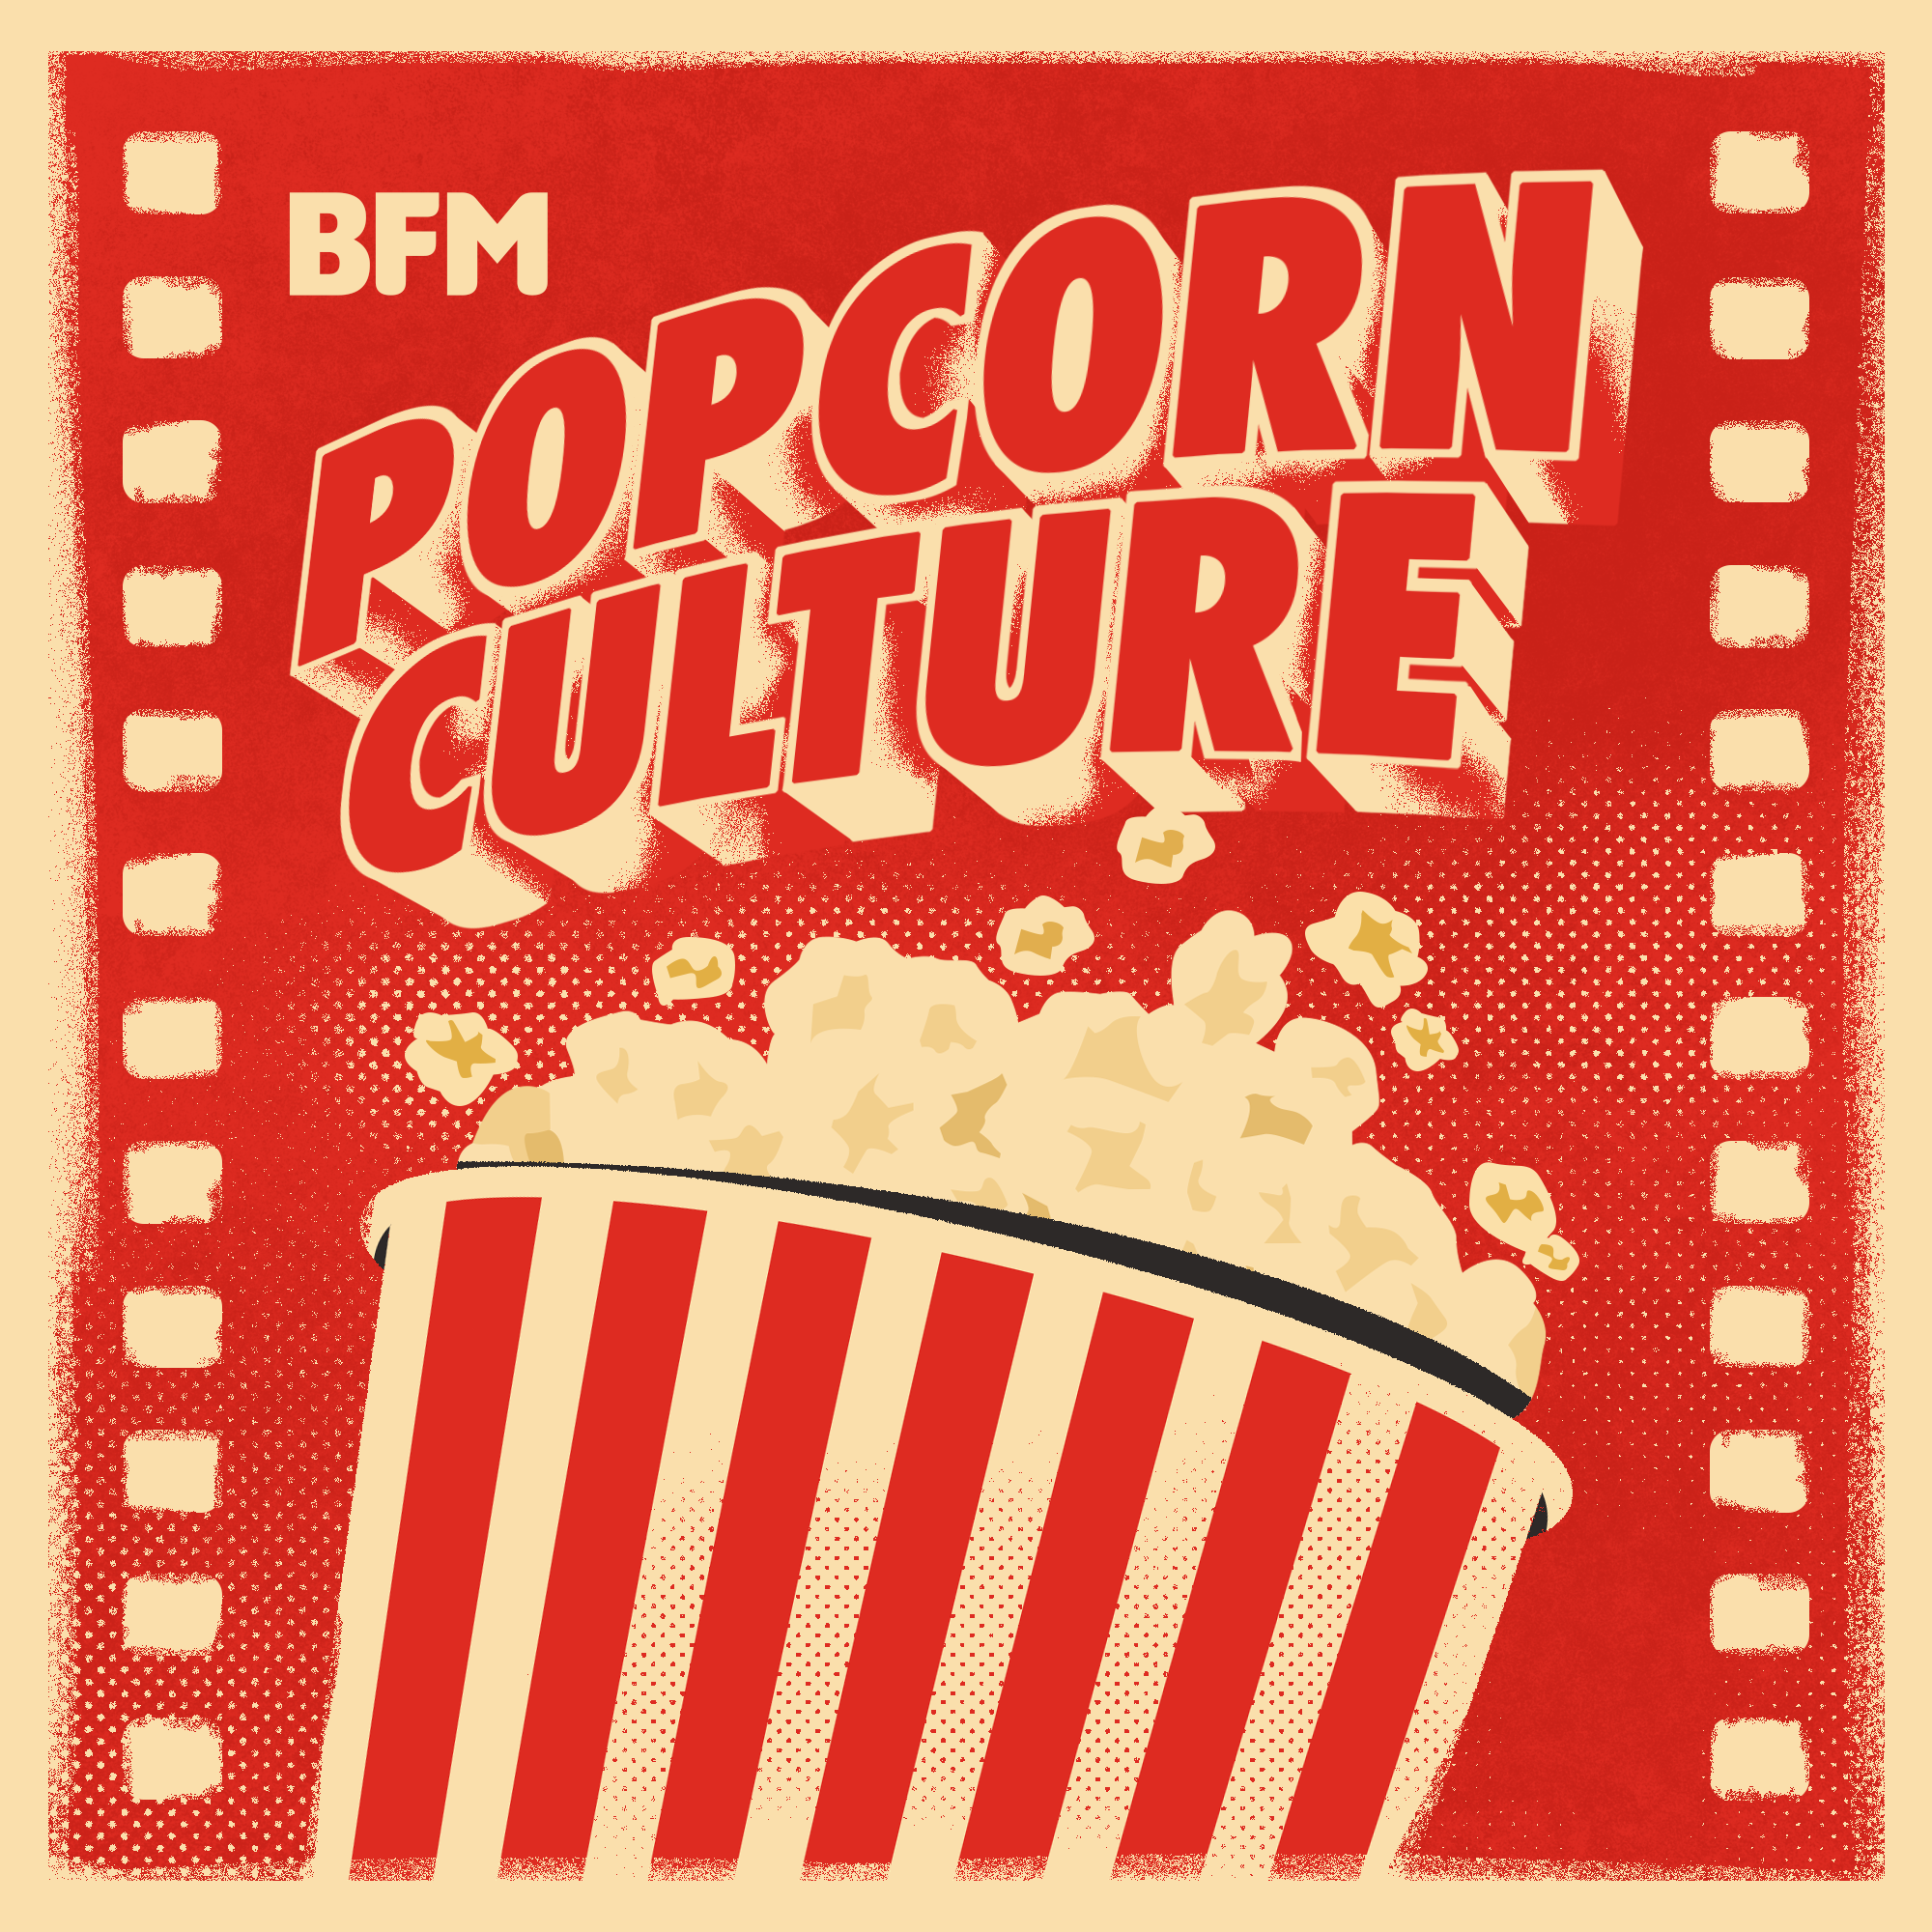 Popcorn Culture - Review: Oppenheimer